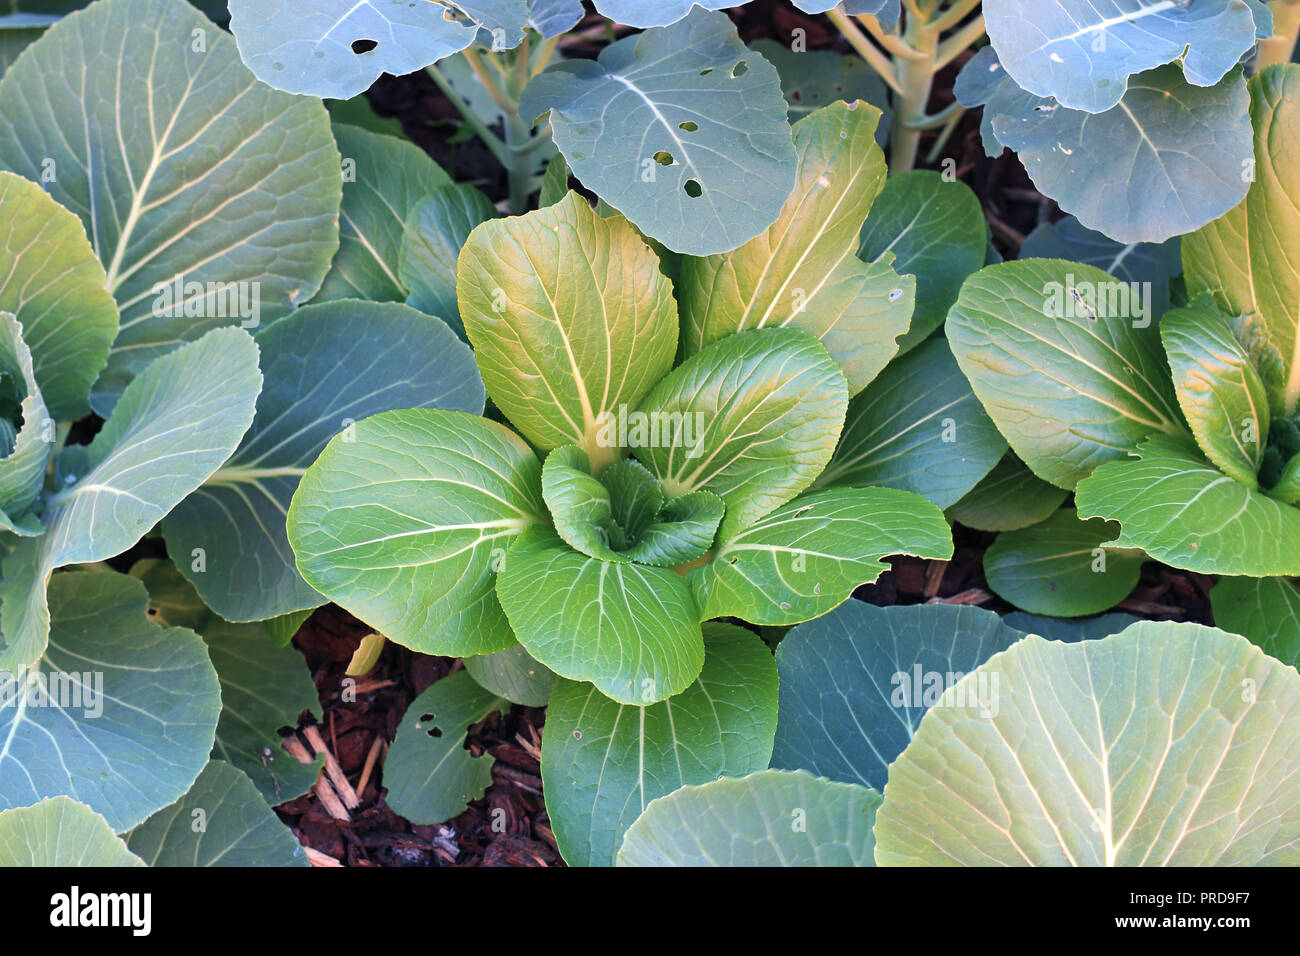 Homegrown bok choy or pak choi on vegetable bed Stock Photo